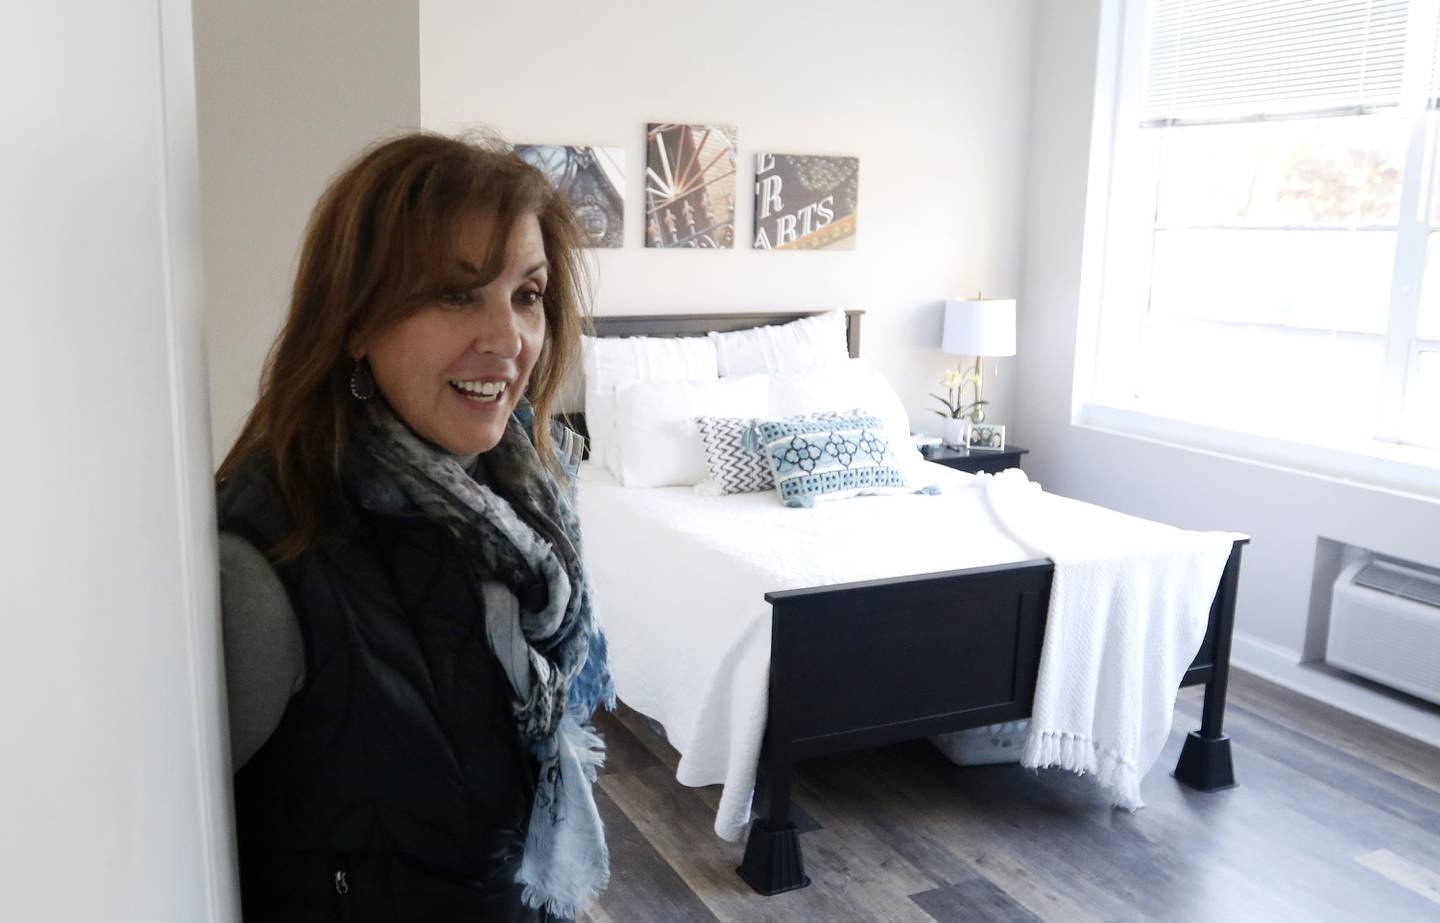 Church Street Apartments tenant Kathy Cheesebro talks Friday, Nov. 5, 2021, about her one-bedroom apartment inside the newly redesigned apartment building, converted from the former Faith Lutheran High School and Immanuel Lutheran Church in Crystal Lake.